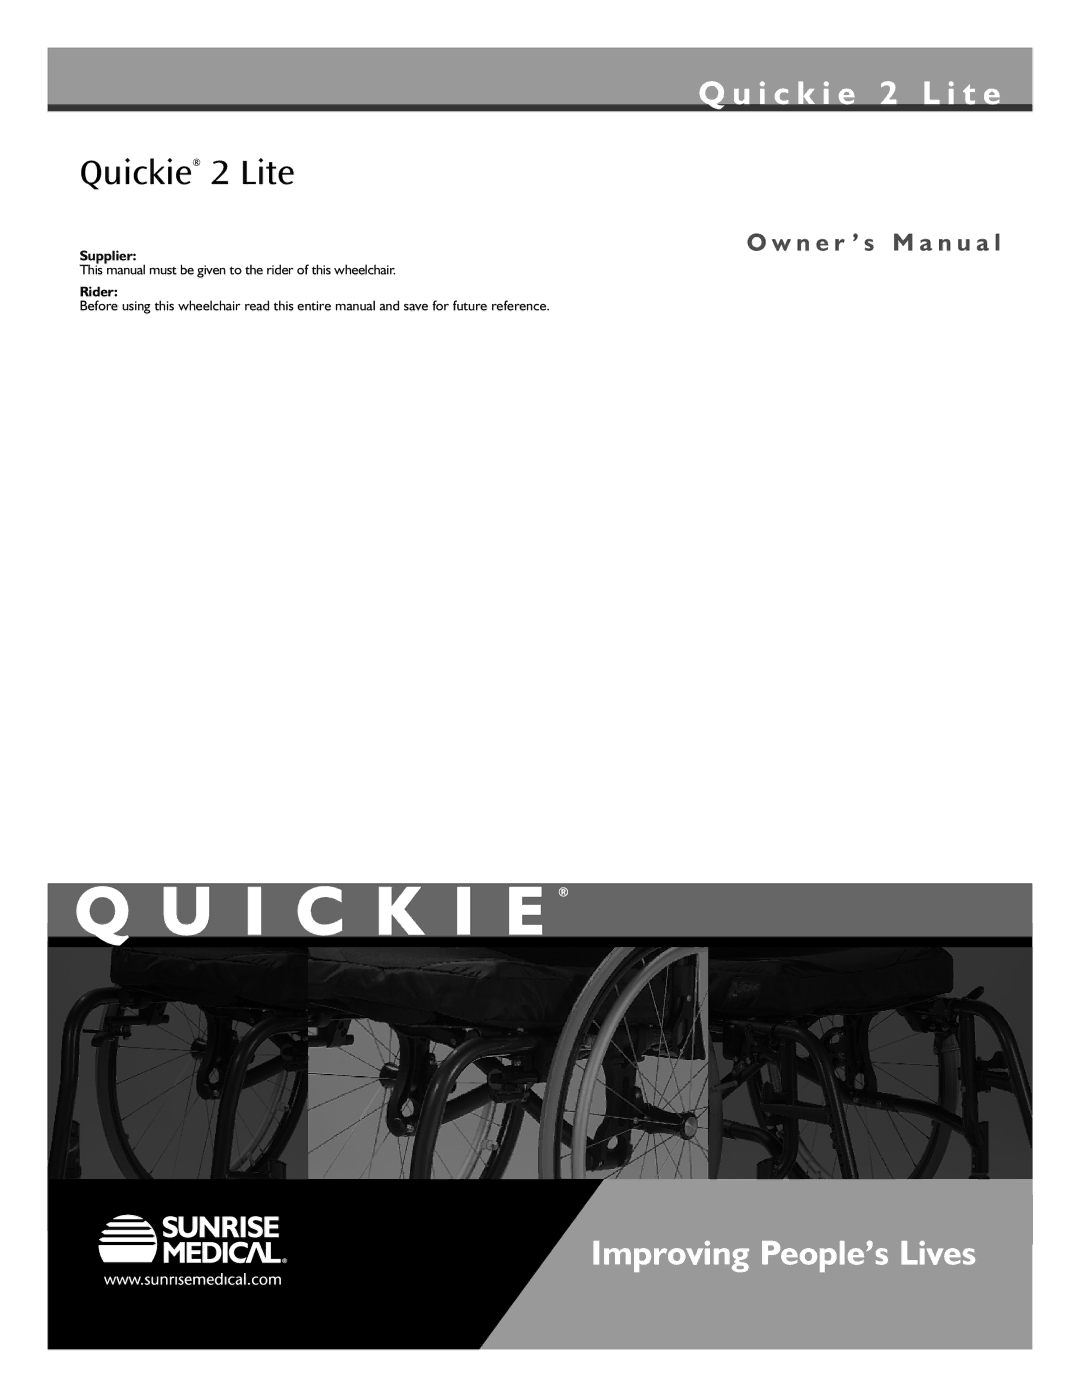 Sunrise Medical Quickie 2 Lite owner manual This manual must be given to the rider of this wheelchair 